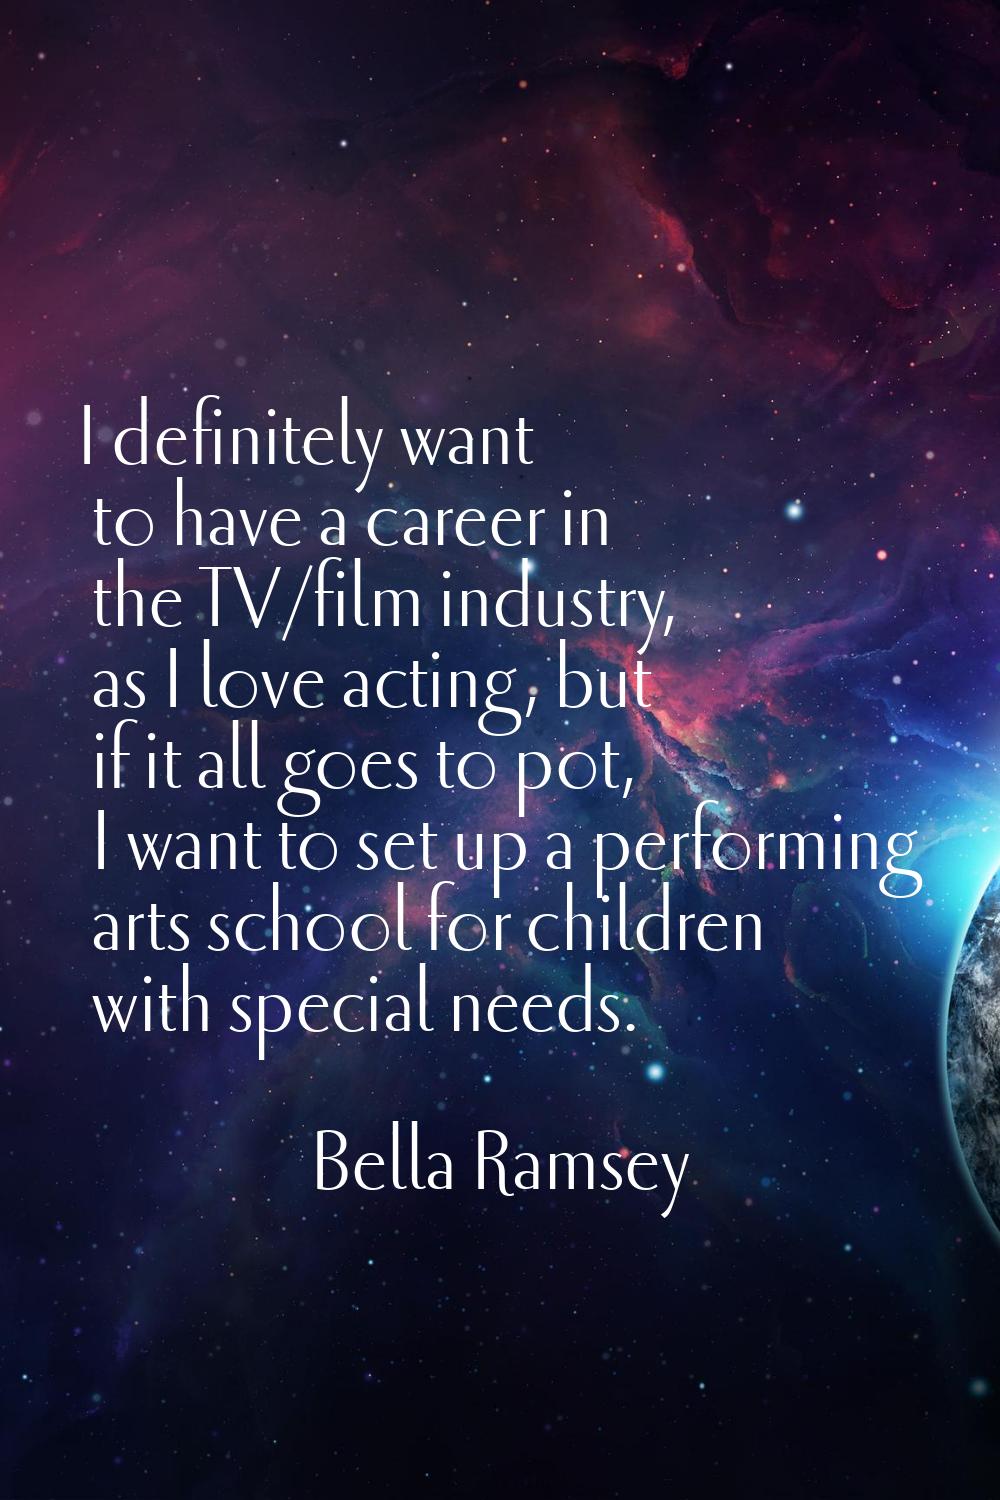 I definitely want to have a career in the TV/film industry, as I love acting, but if it all goes to